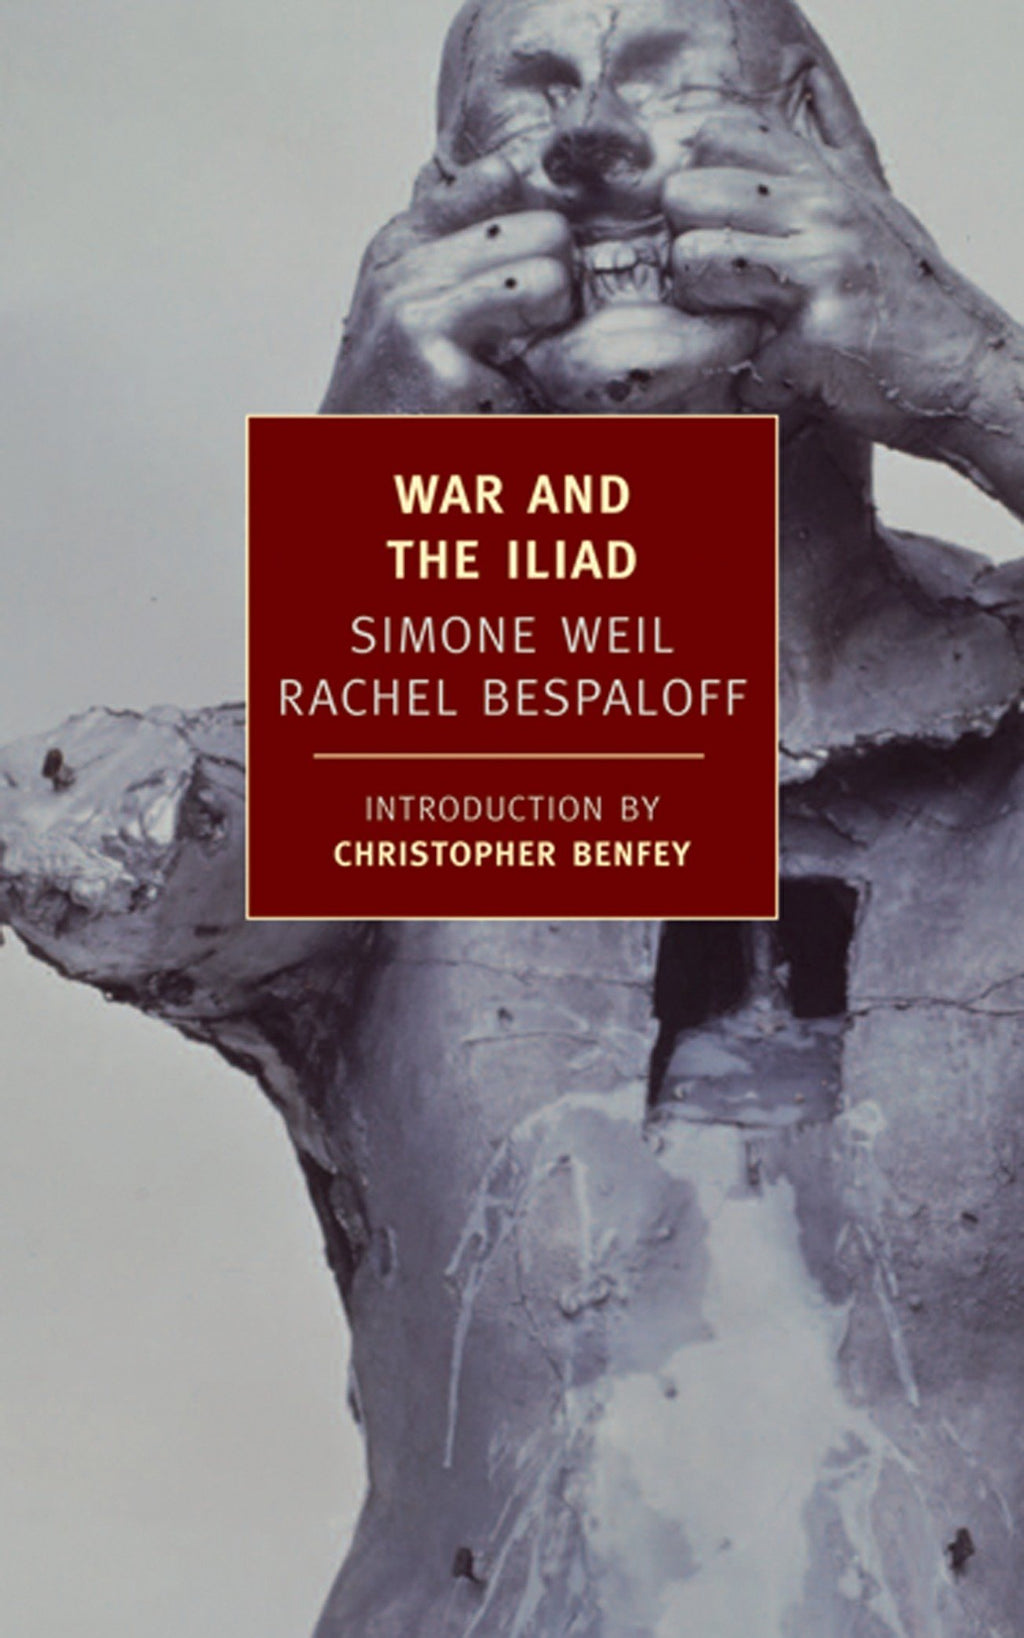 War and the Iliad by Simone Weil